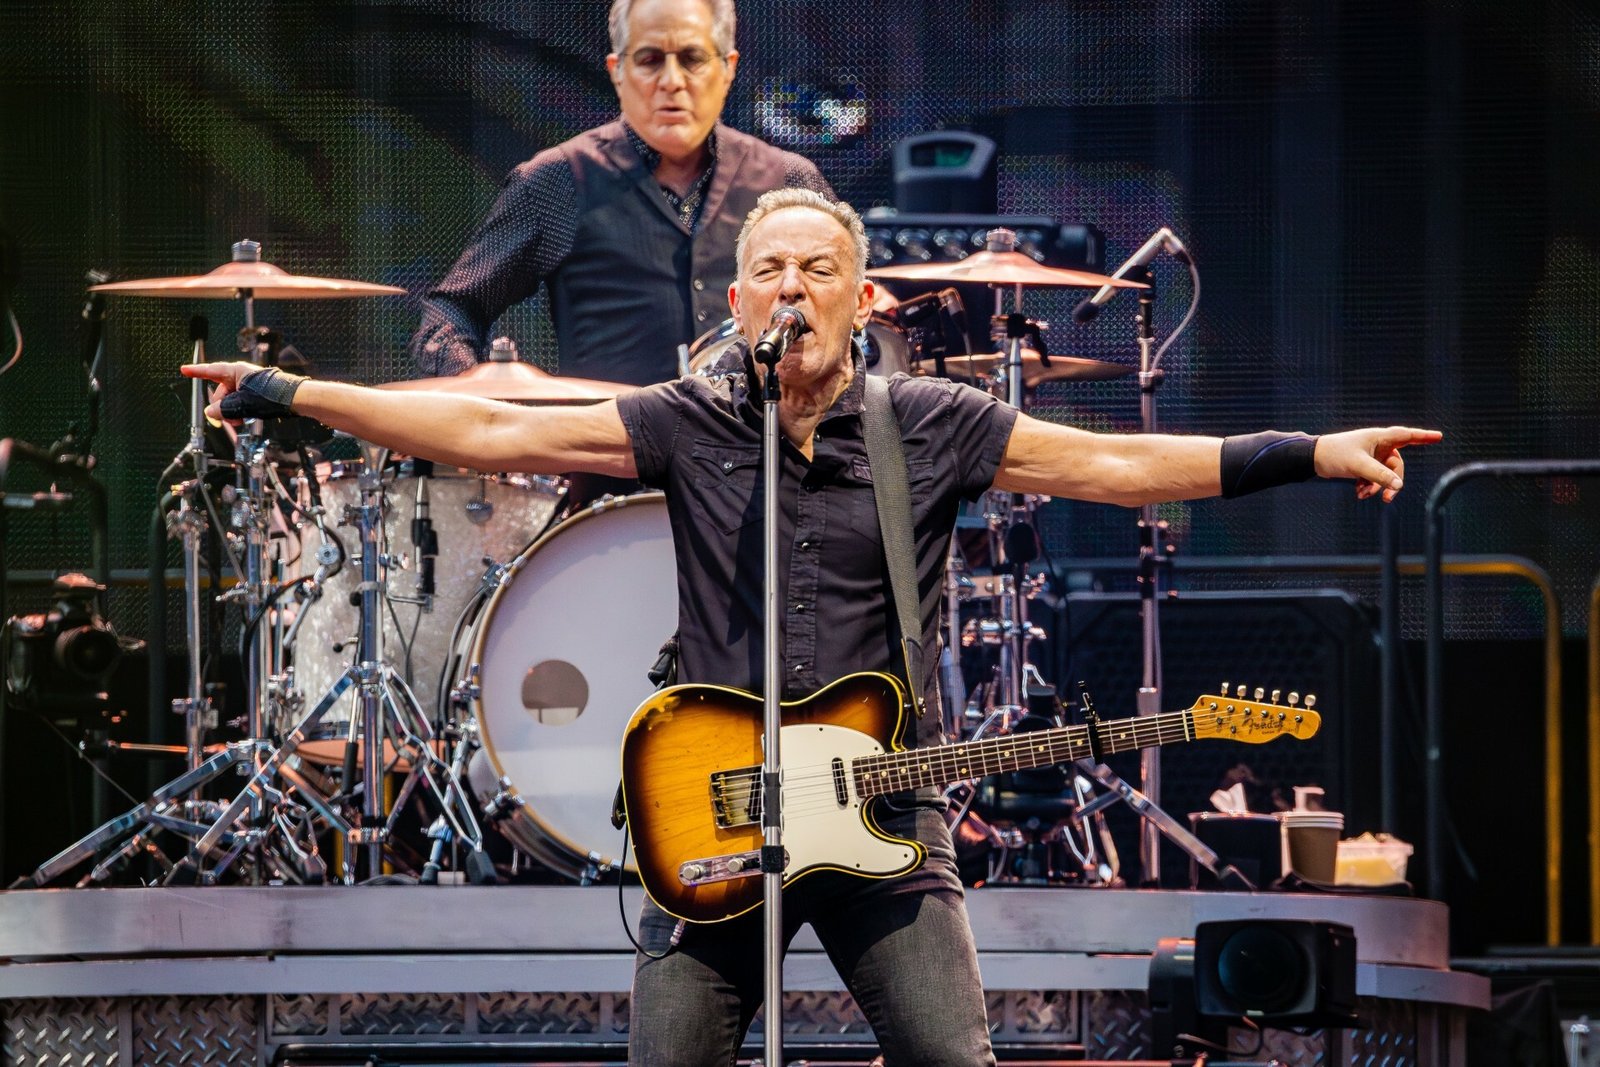 Bruce Springsteen tour setlist: See what he played at BTS Hyde Park in London